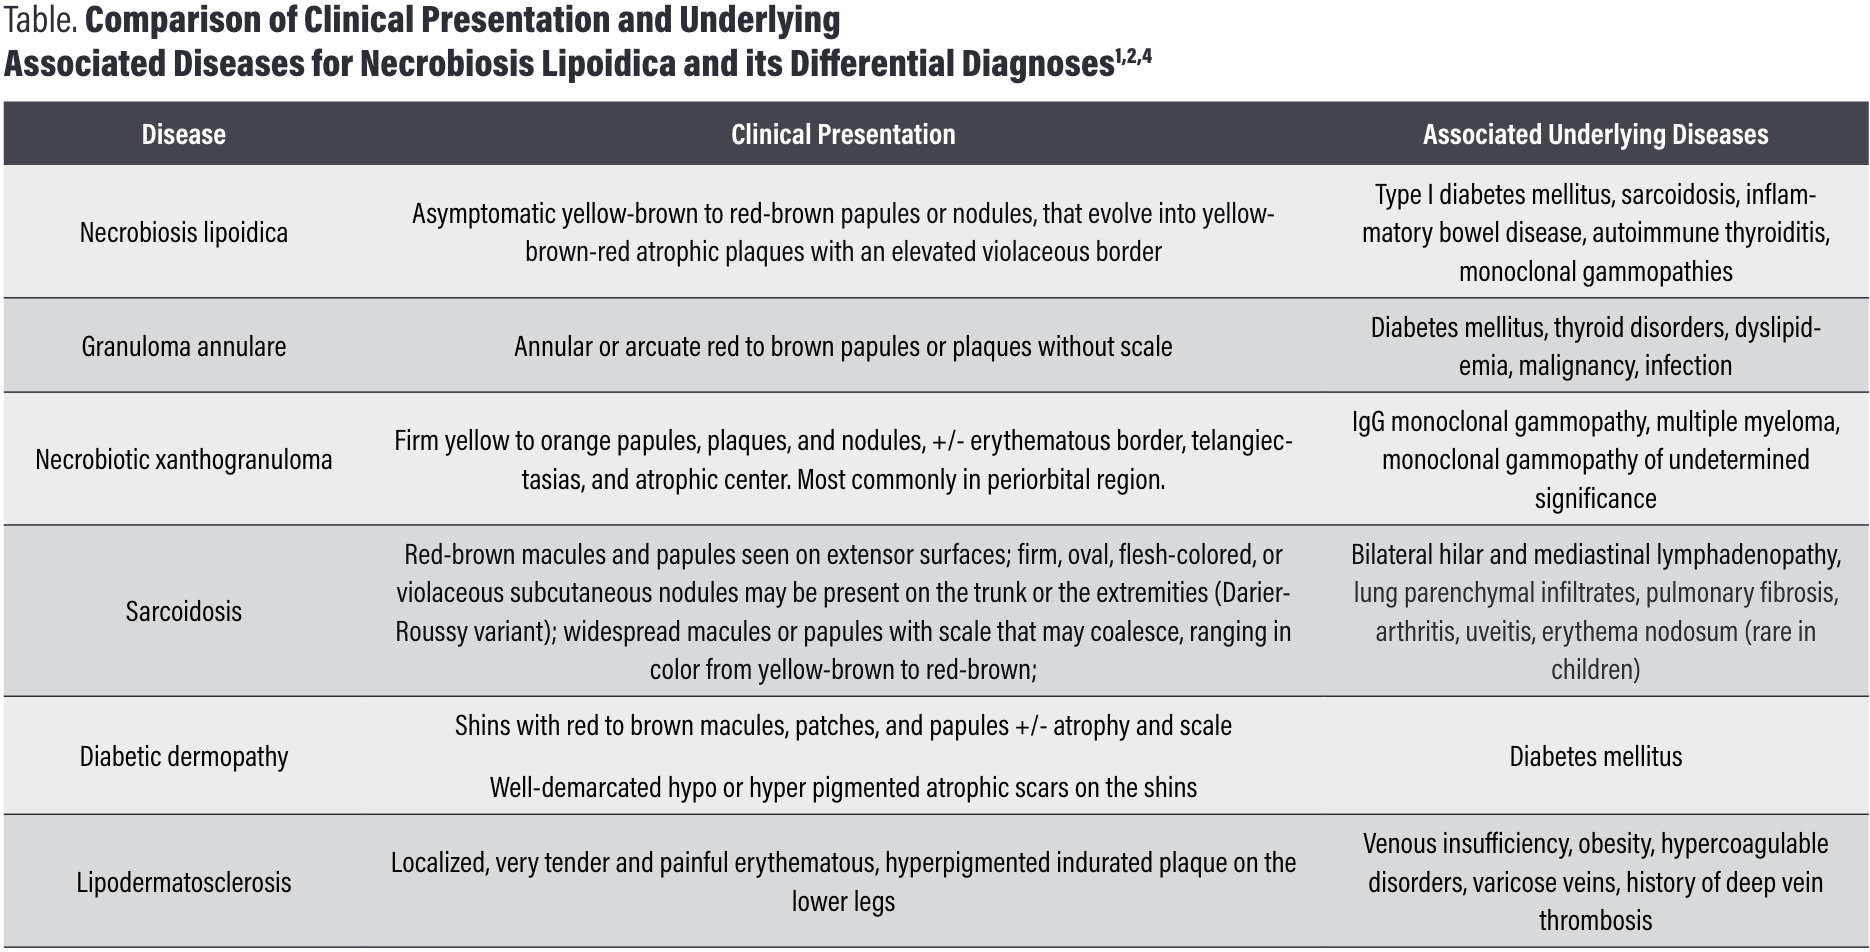 Table: Comparison of Clinical Presentation and Underlying Associated Diseases for Necrobiosis Lipoidica and its Differential Diagnoses1,2,4